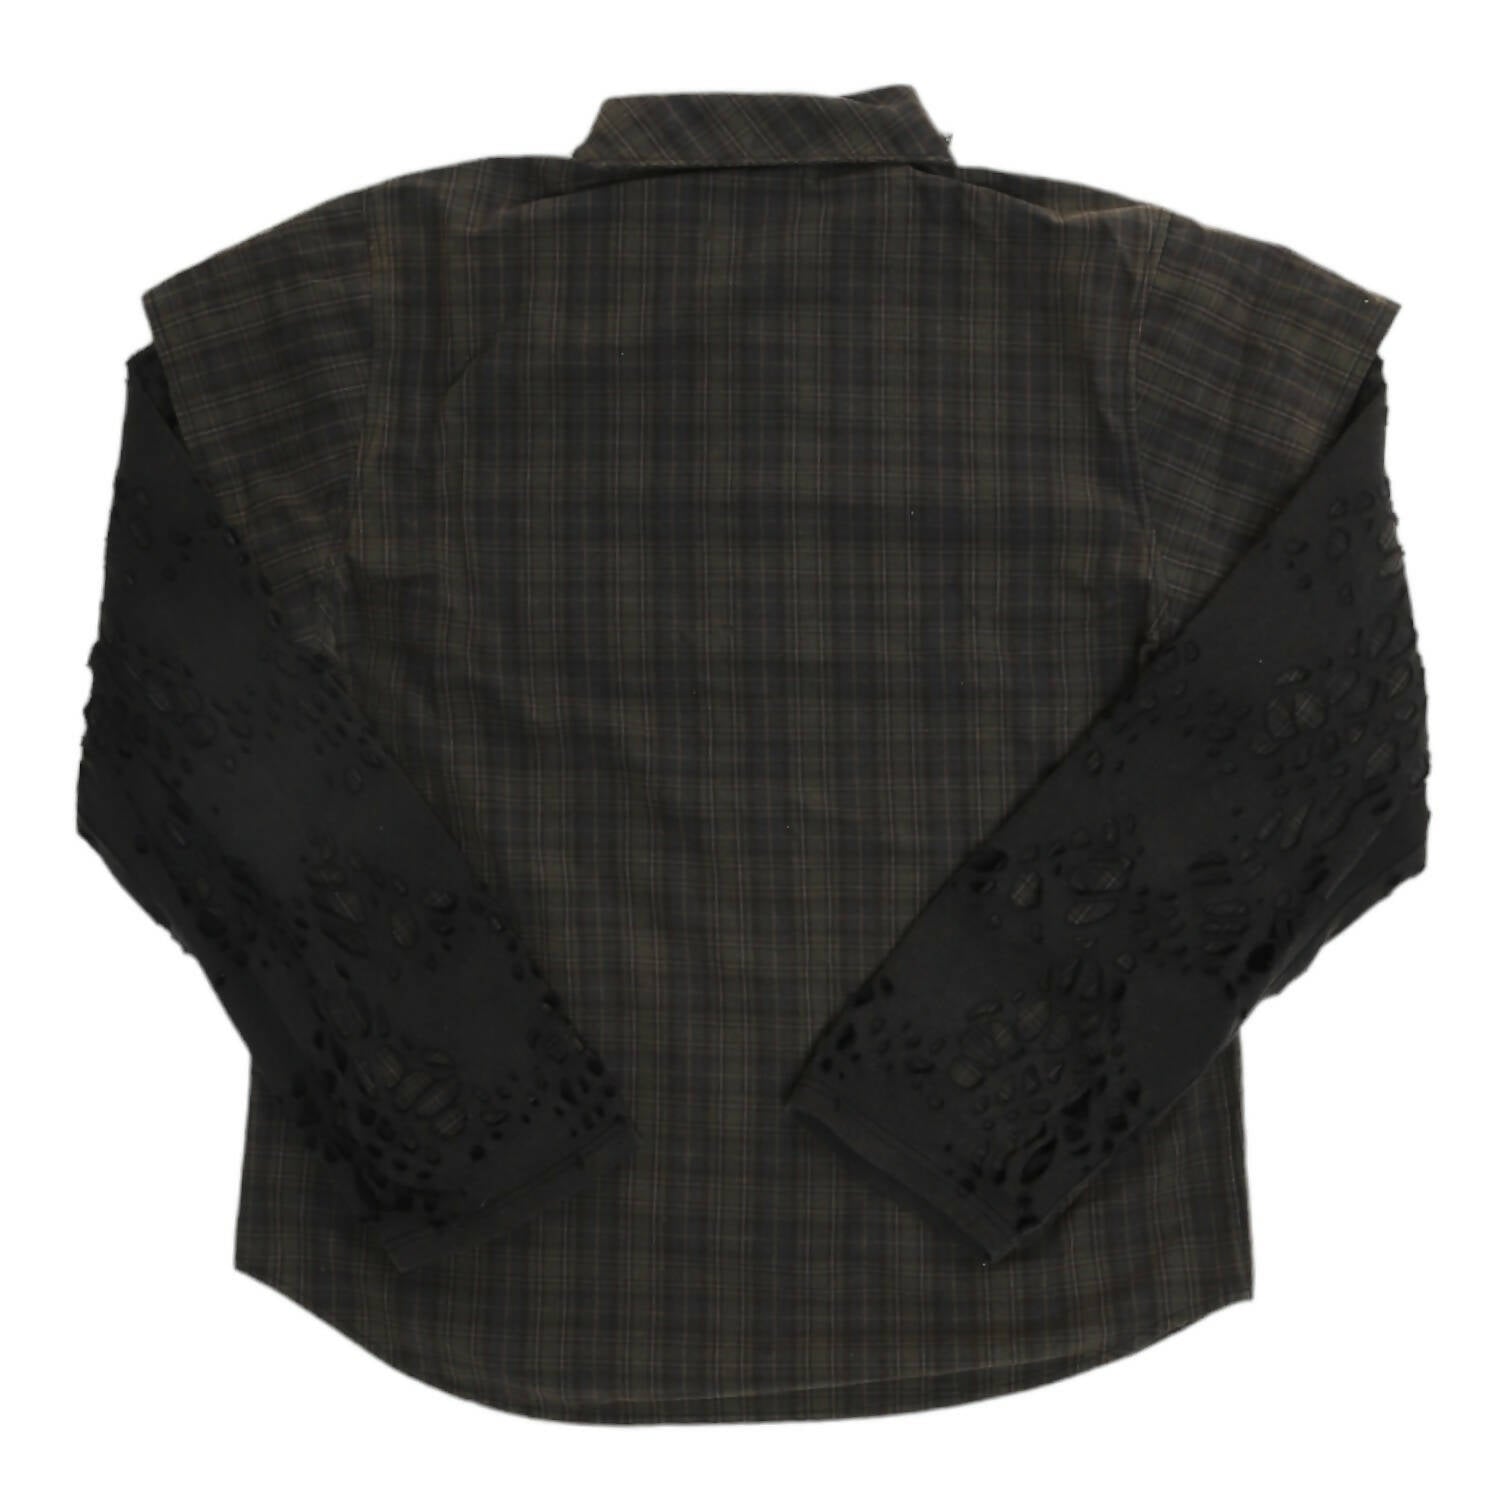 BL OVERLAPPING CROWLEY SHIRT WITH BURNEDWEB GARMENT SLEEVES